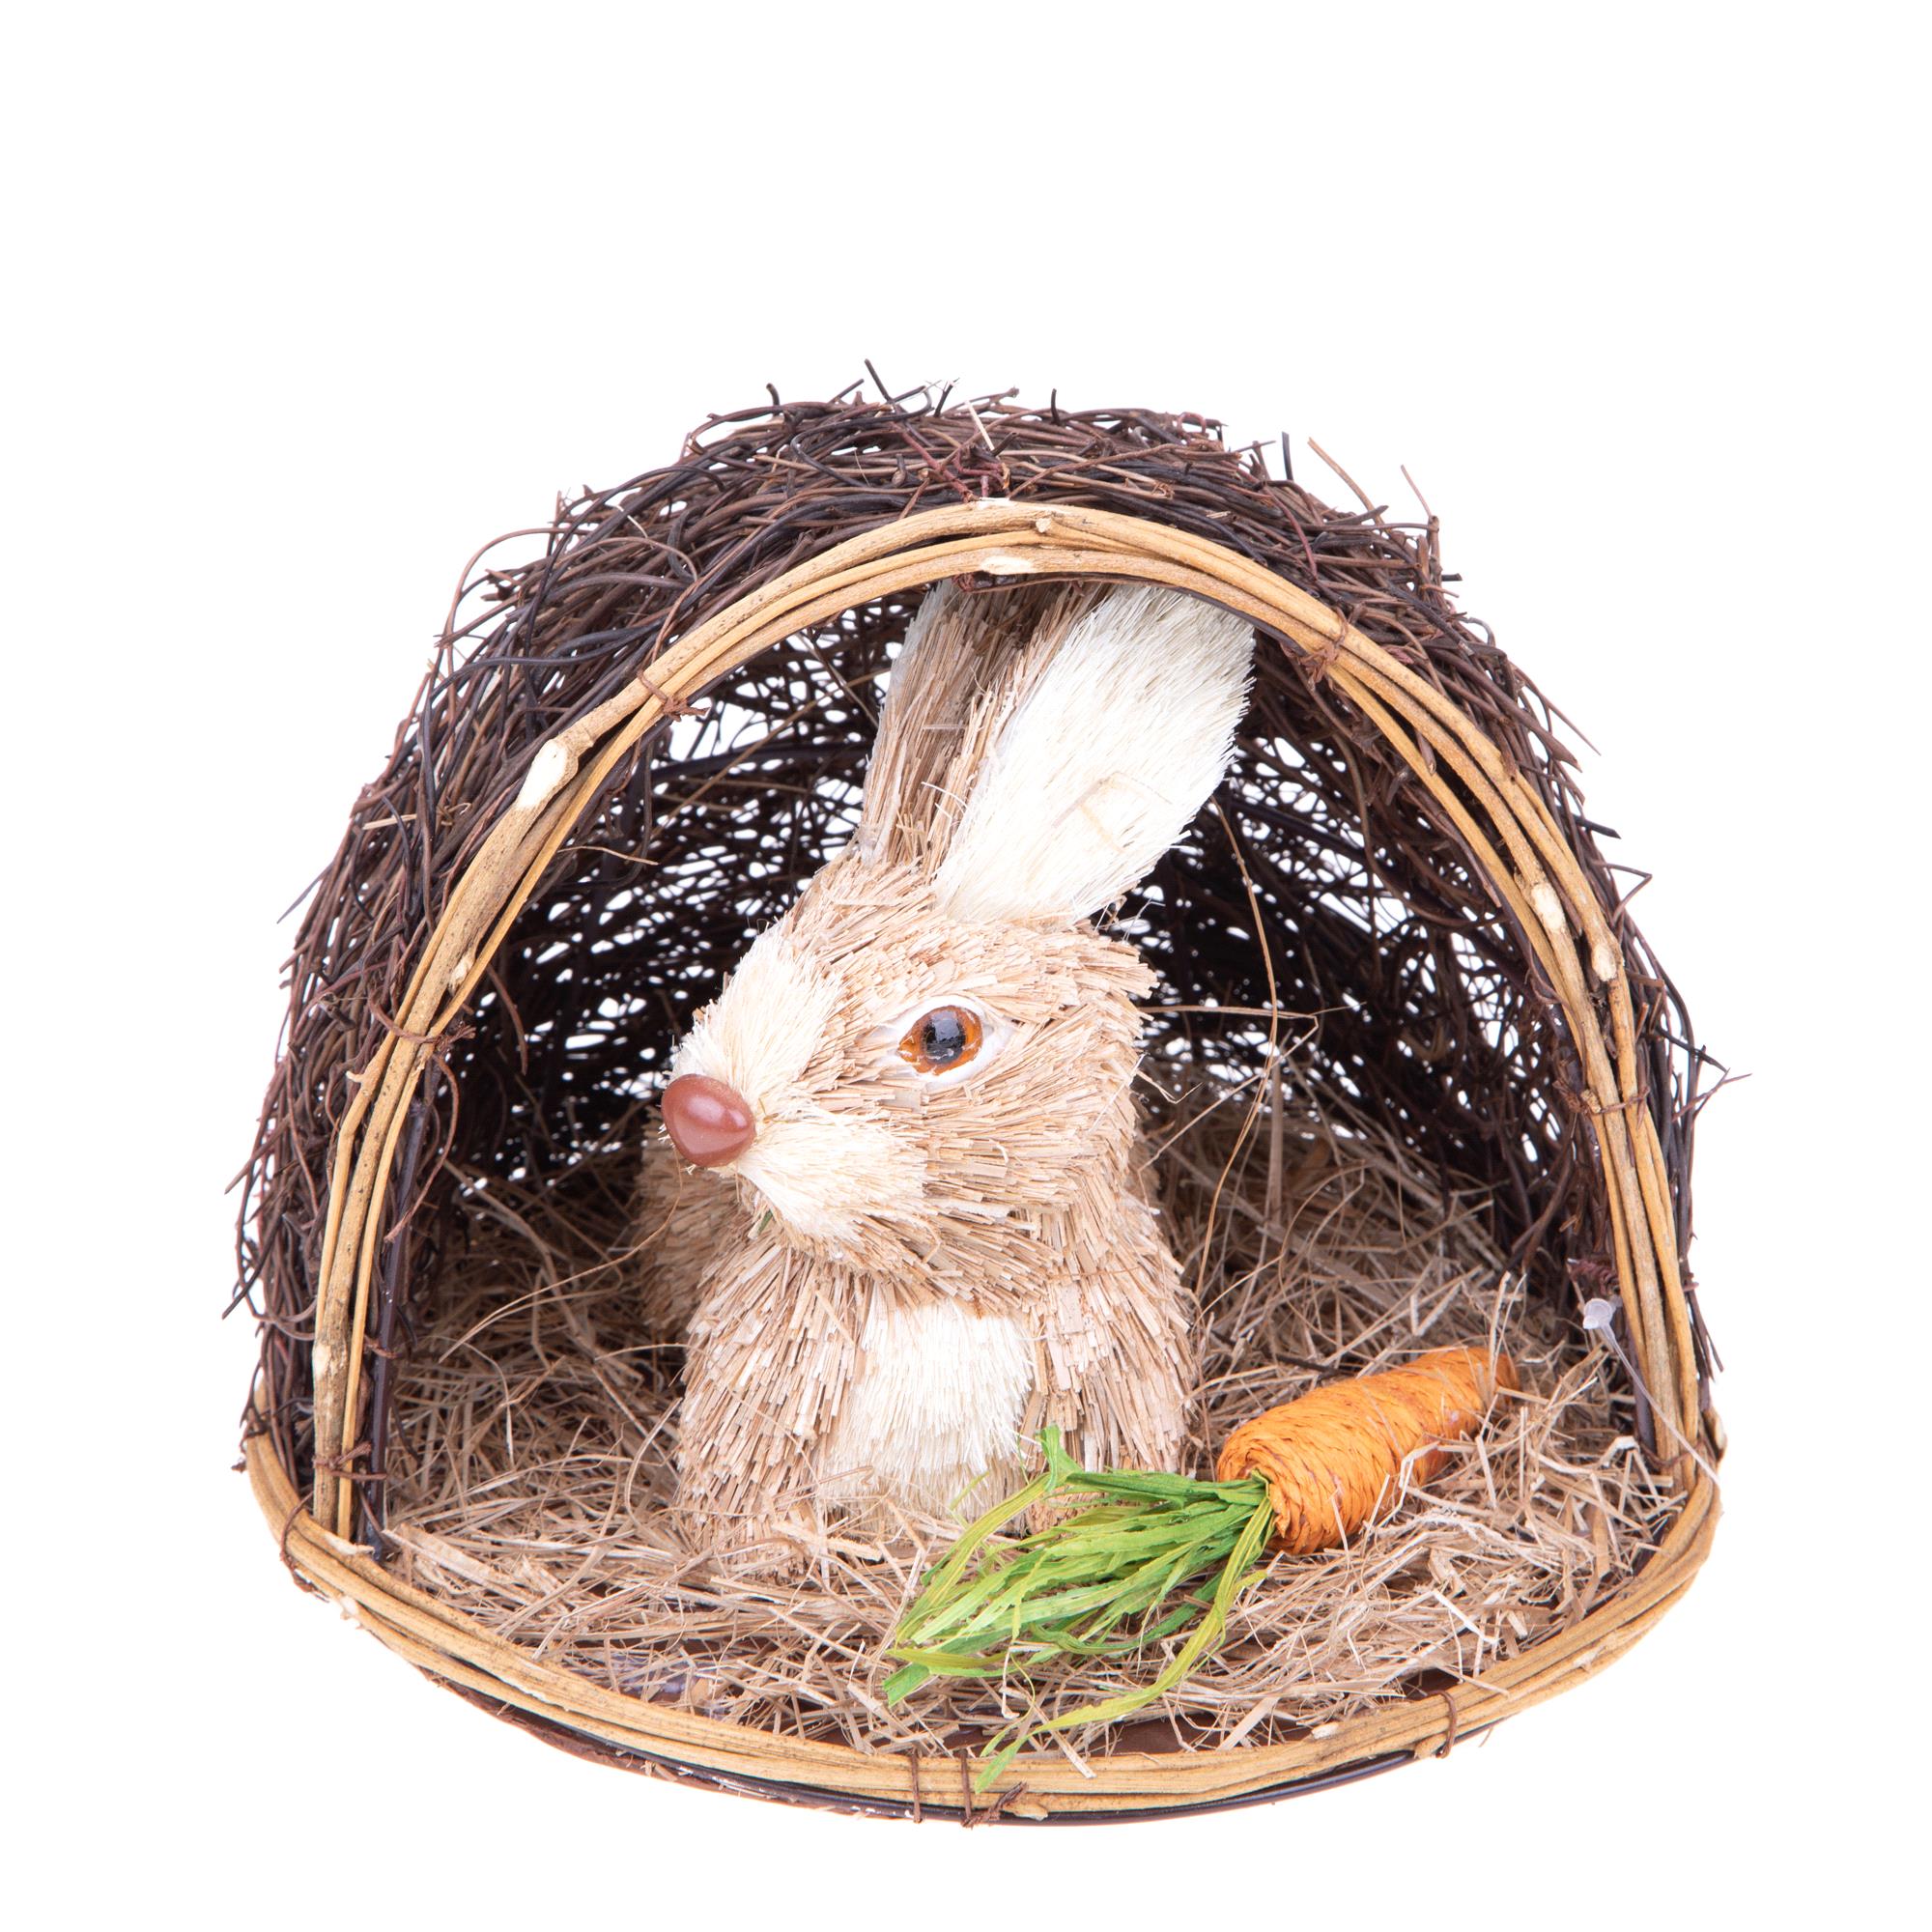 SPRING AND EASTER DECORATIONS, Easter subjects, rabbits, hens, sheep ect., CONIGLIO C/CAROTA 22XH.15 CM